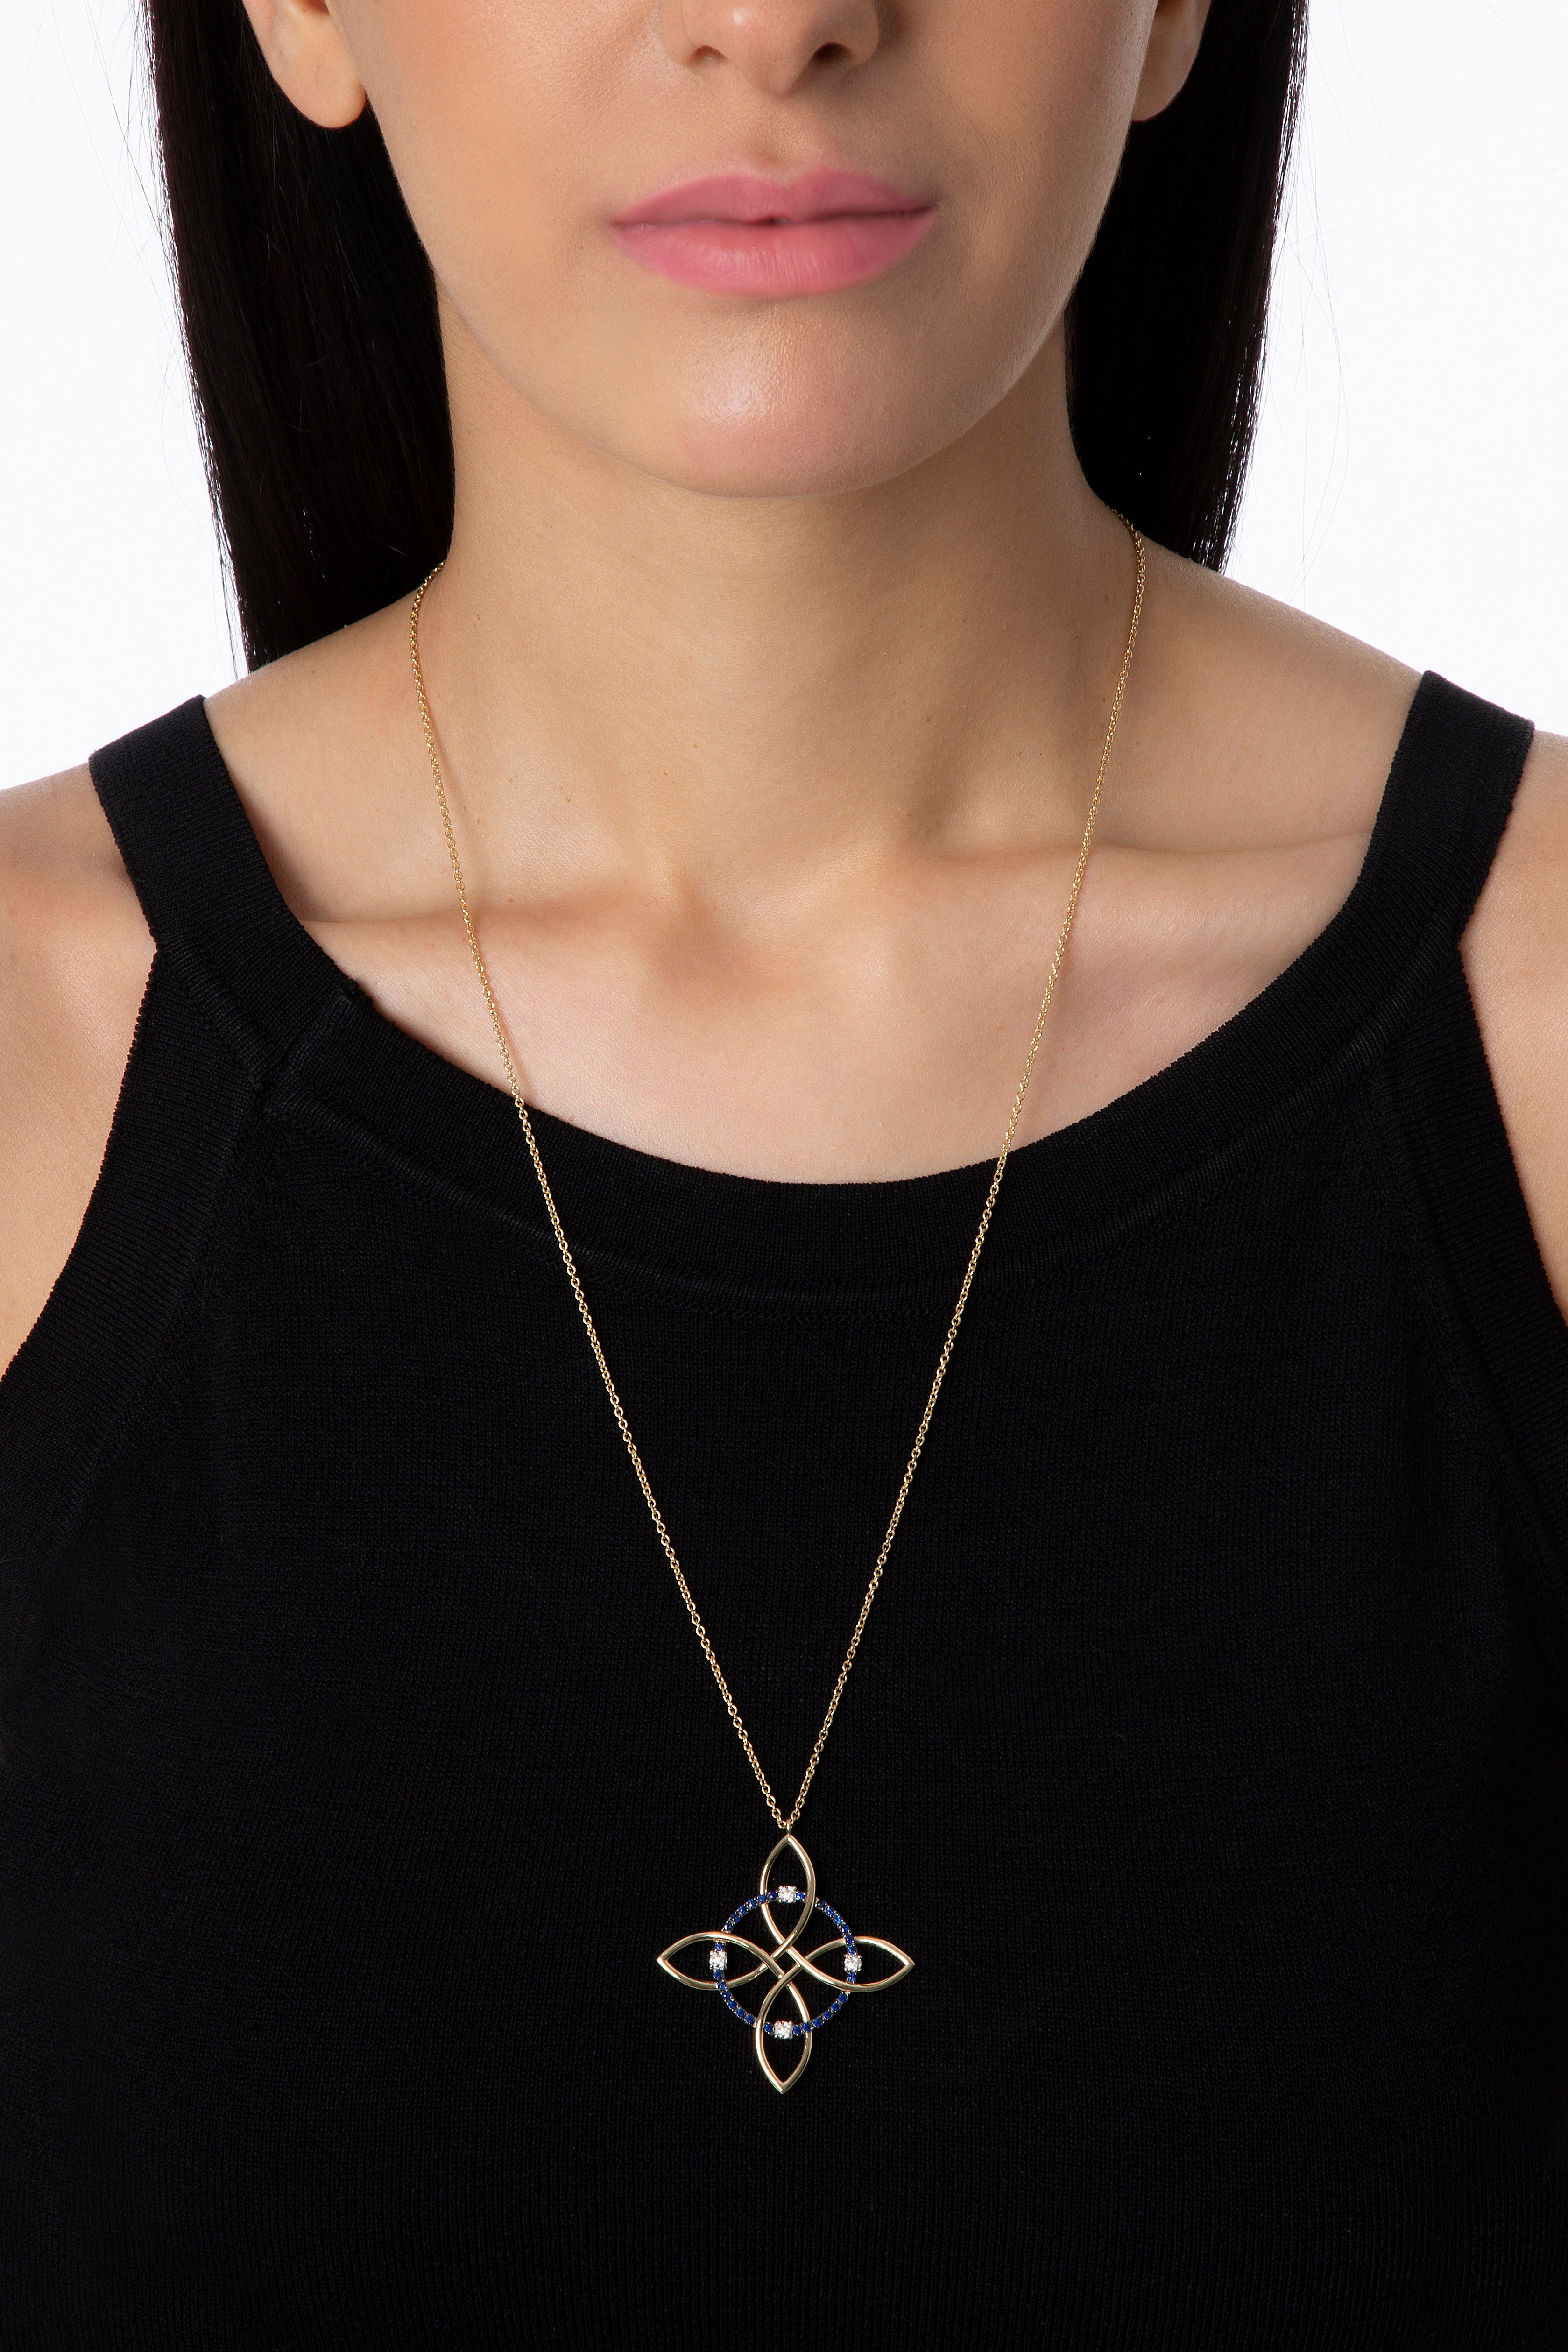 Magnific Magic Knot Necklace in Yellow Gold - Her Story Shop